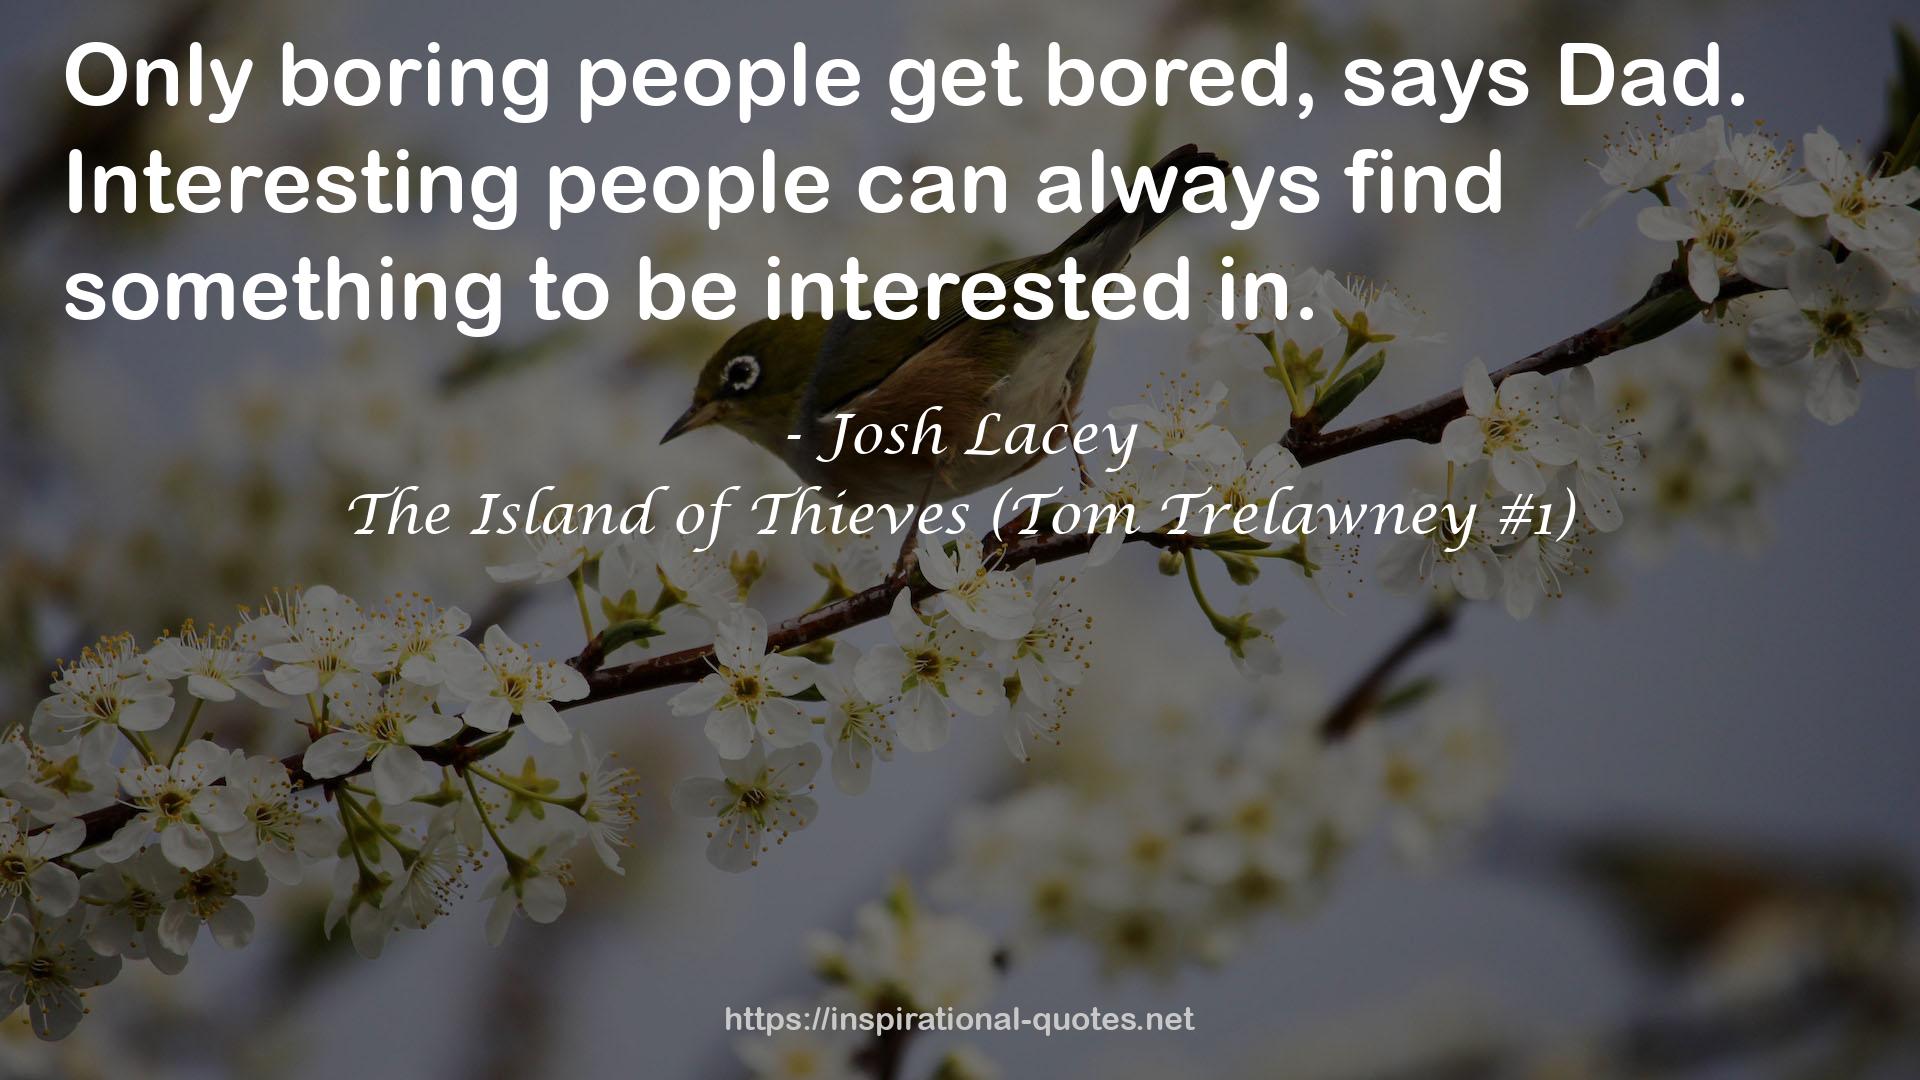 The Island of Thieves (Tom Trelawney #1) QUOTES